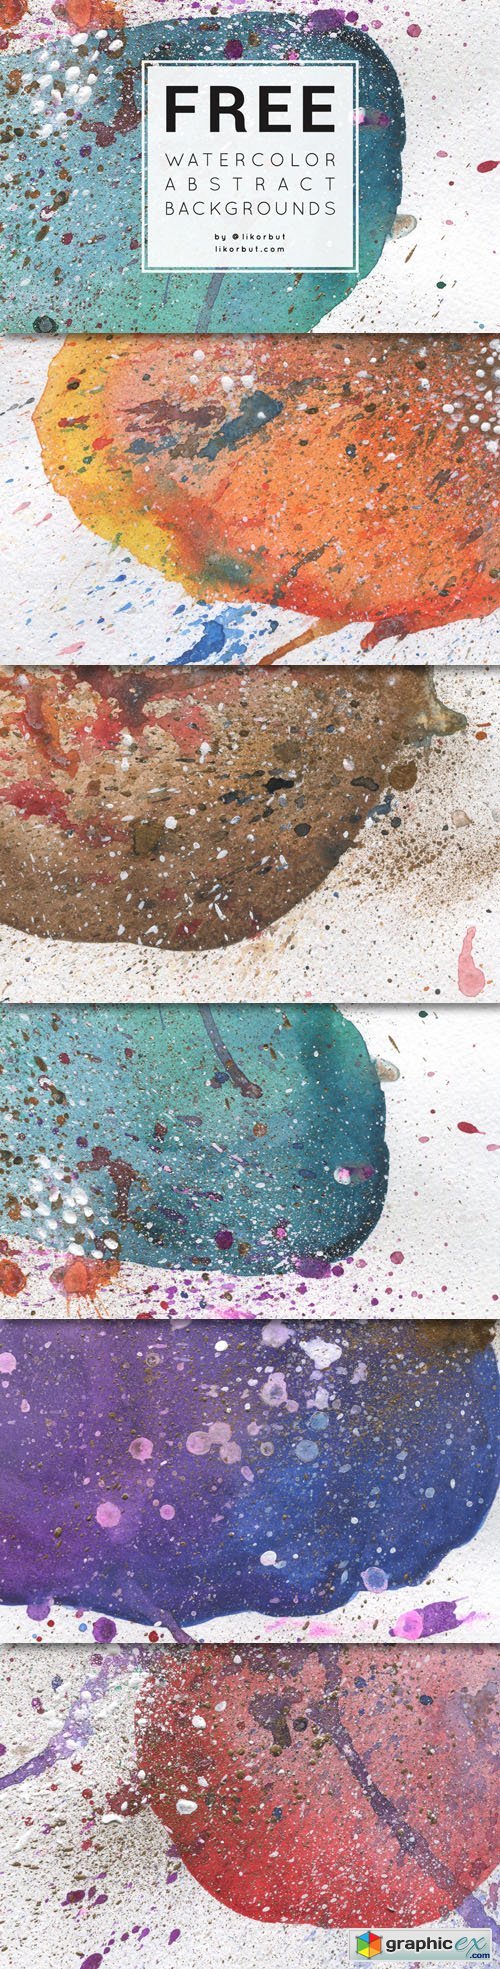 5 Watercolor Abstract Backgrounds